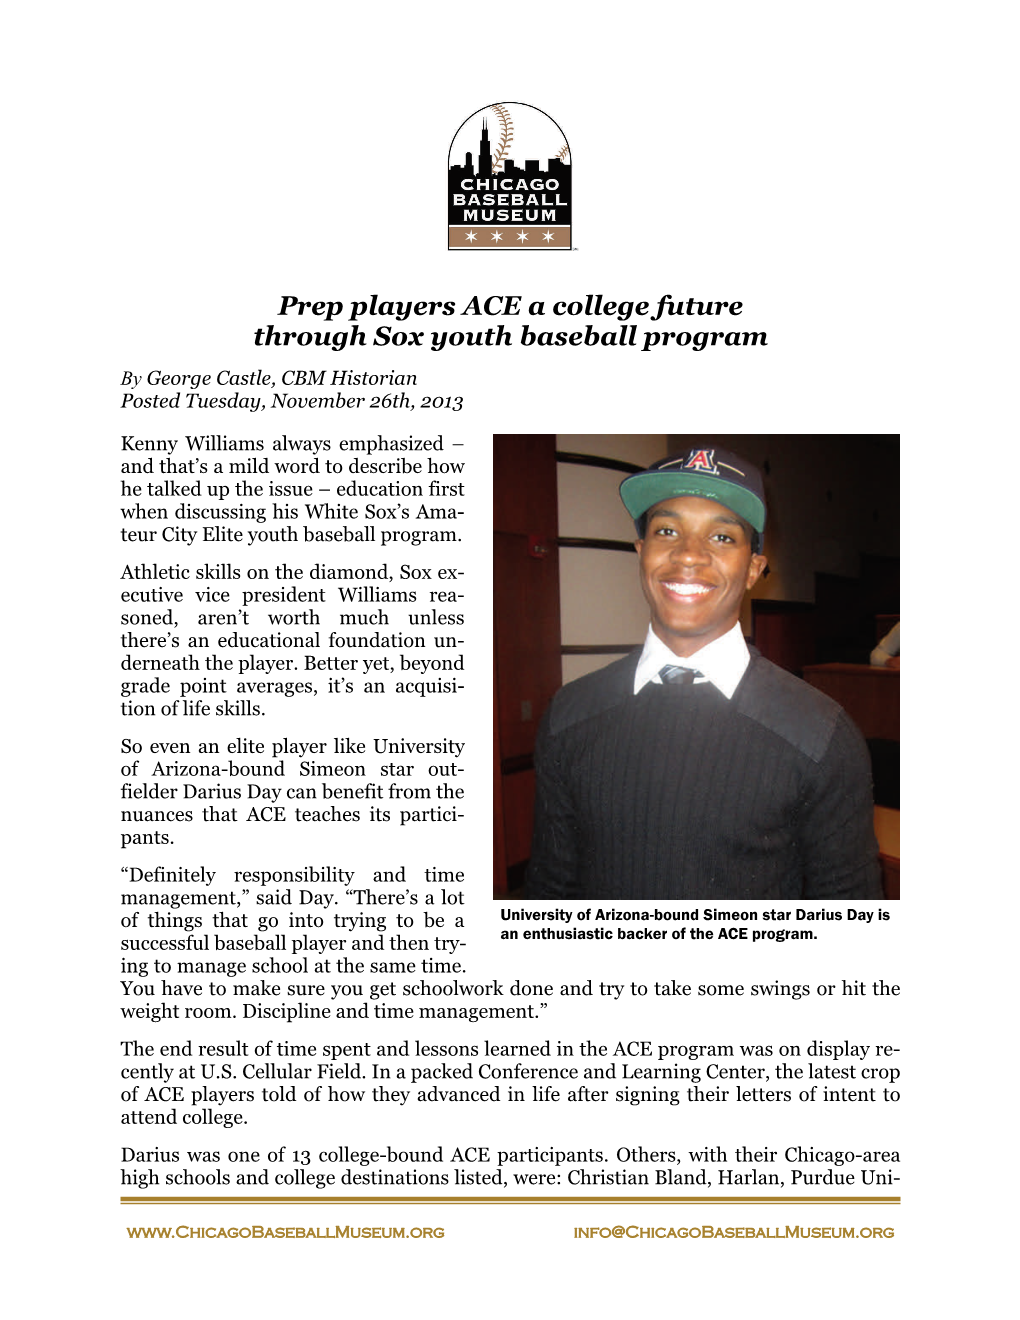 Prep Players ACE a College Future Through Sox Youth Baseball Program by George Castle, CBM Historian Posted Tuesday, November 26Th, 2013